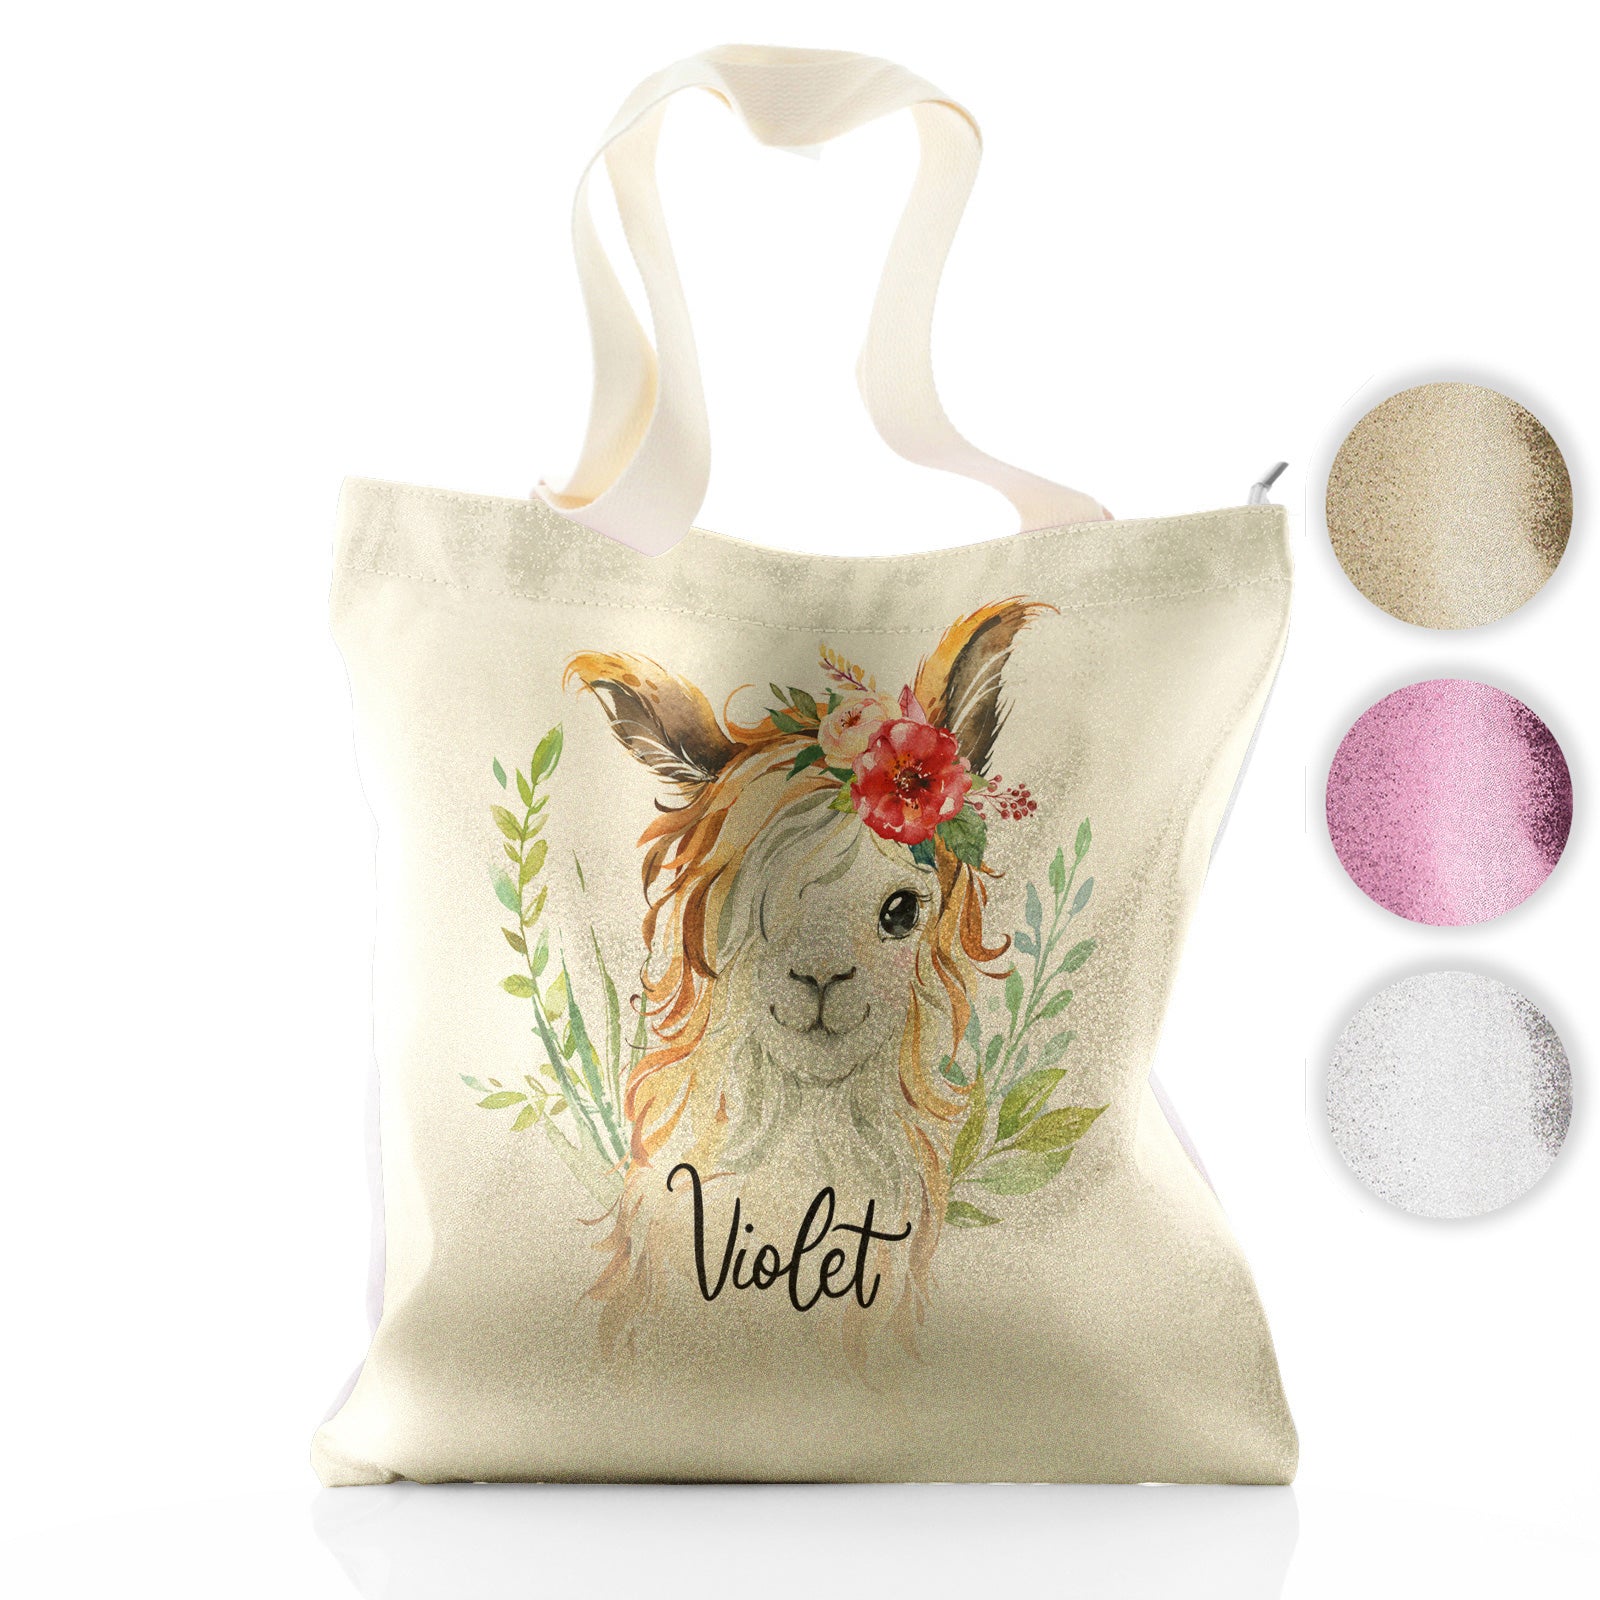 Personalised Glitter Tote Bag with White Goat with Red Flower Hair and Cute Text